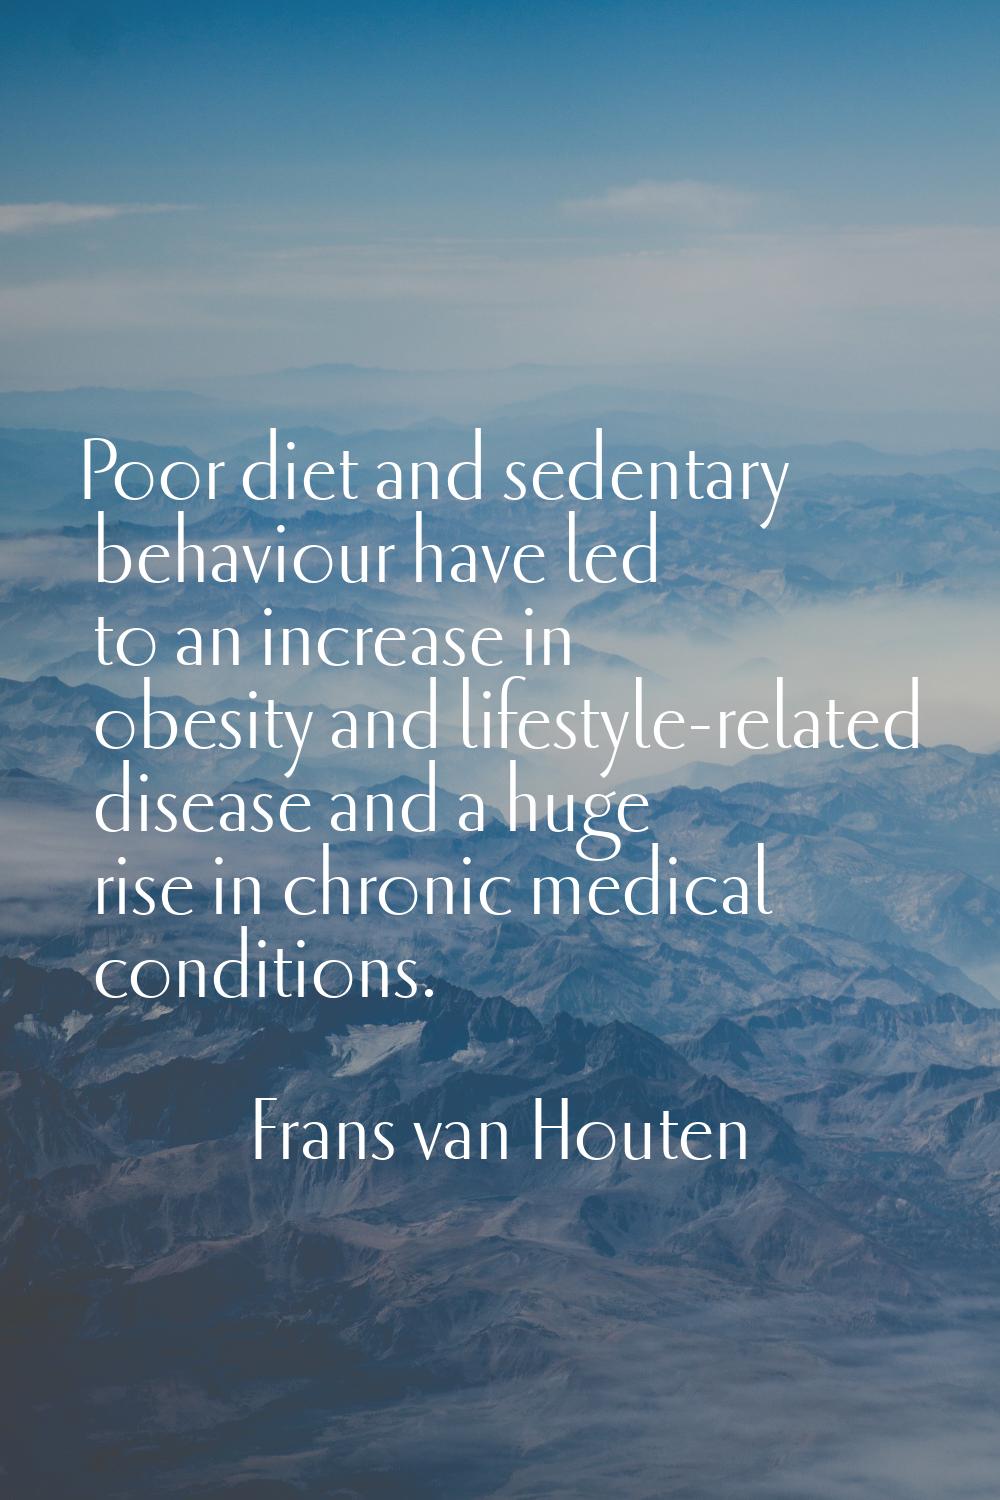 Poor diet and sedentary behaviour have led to an increase in obesity and lifestyle-related disease 